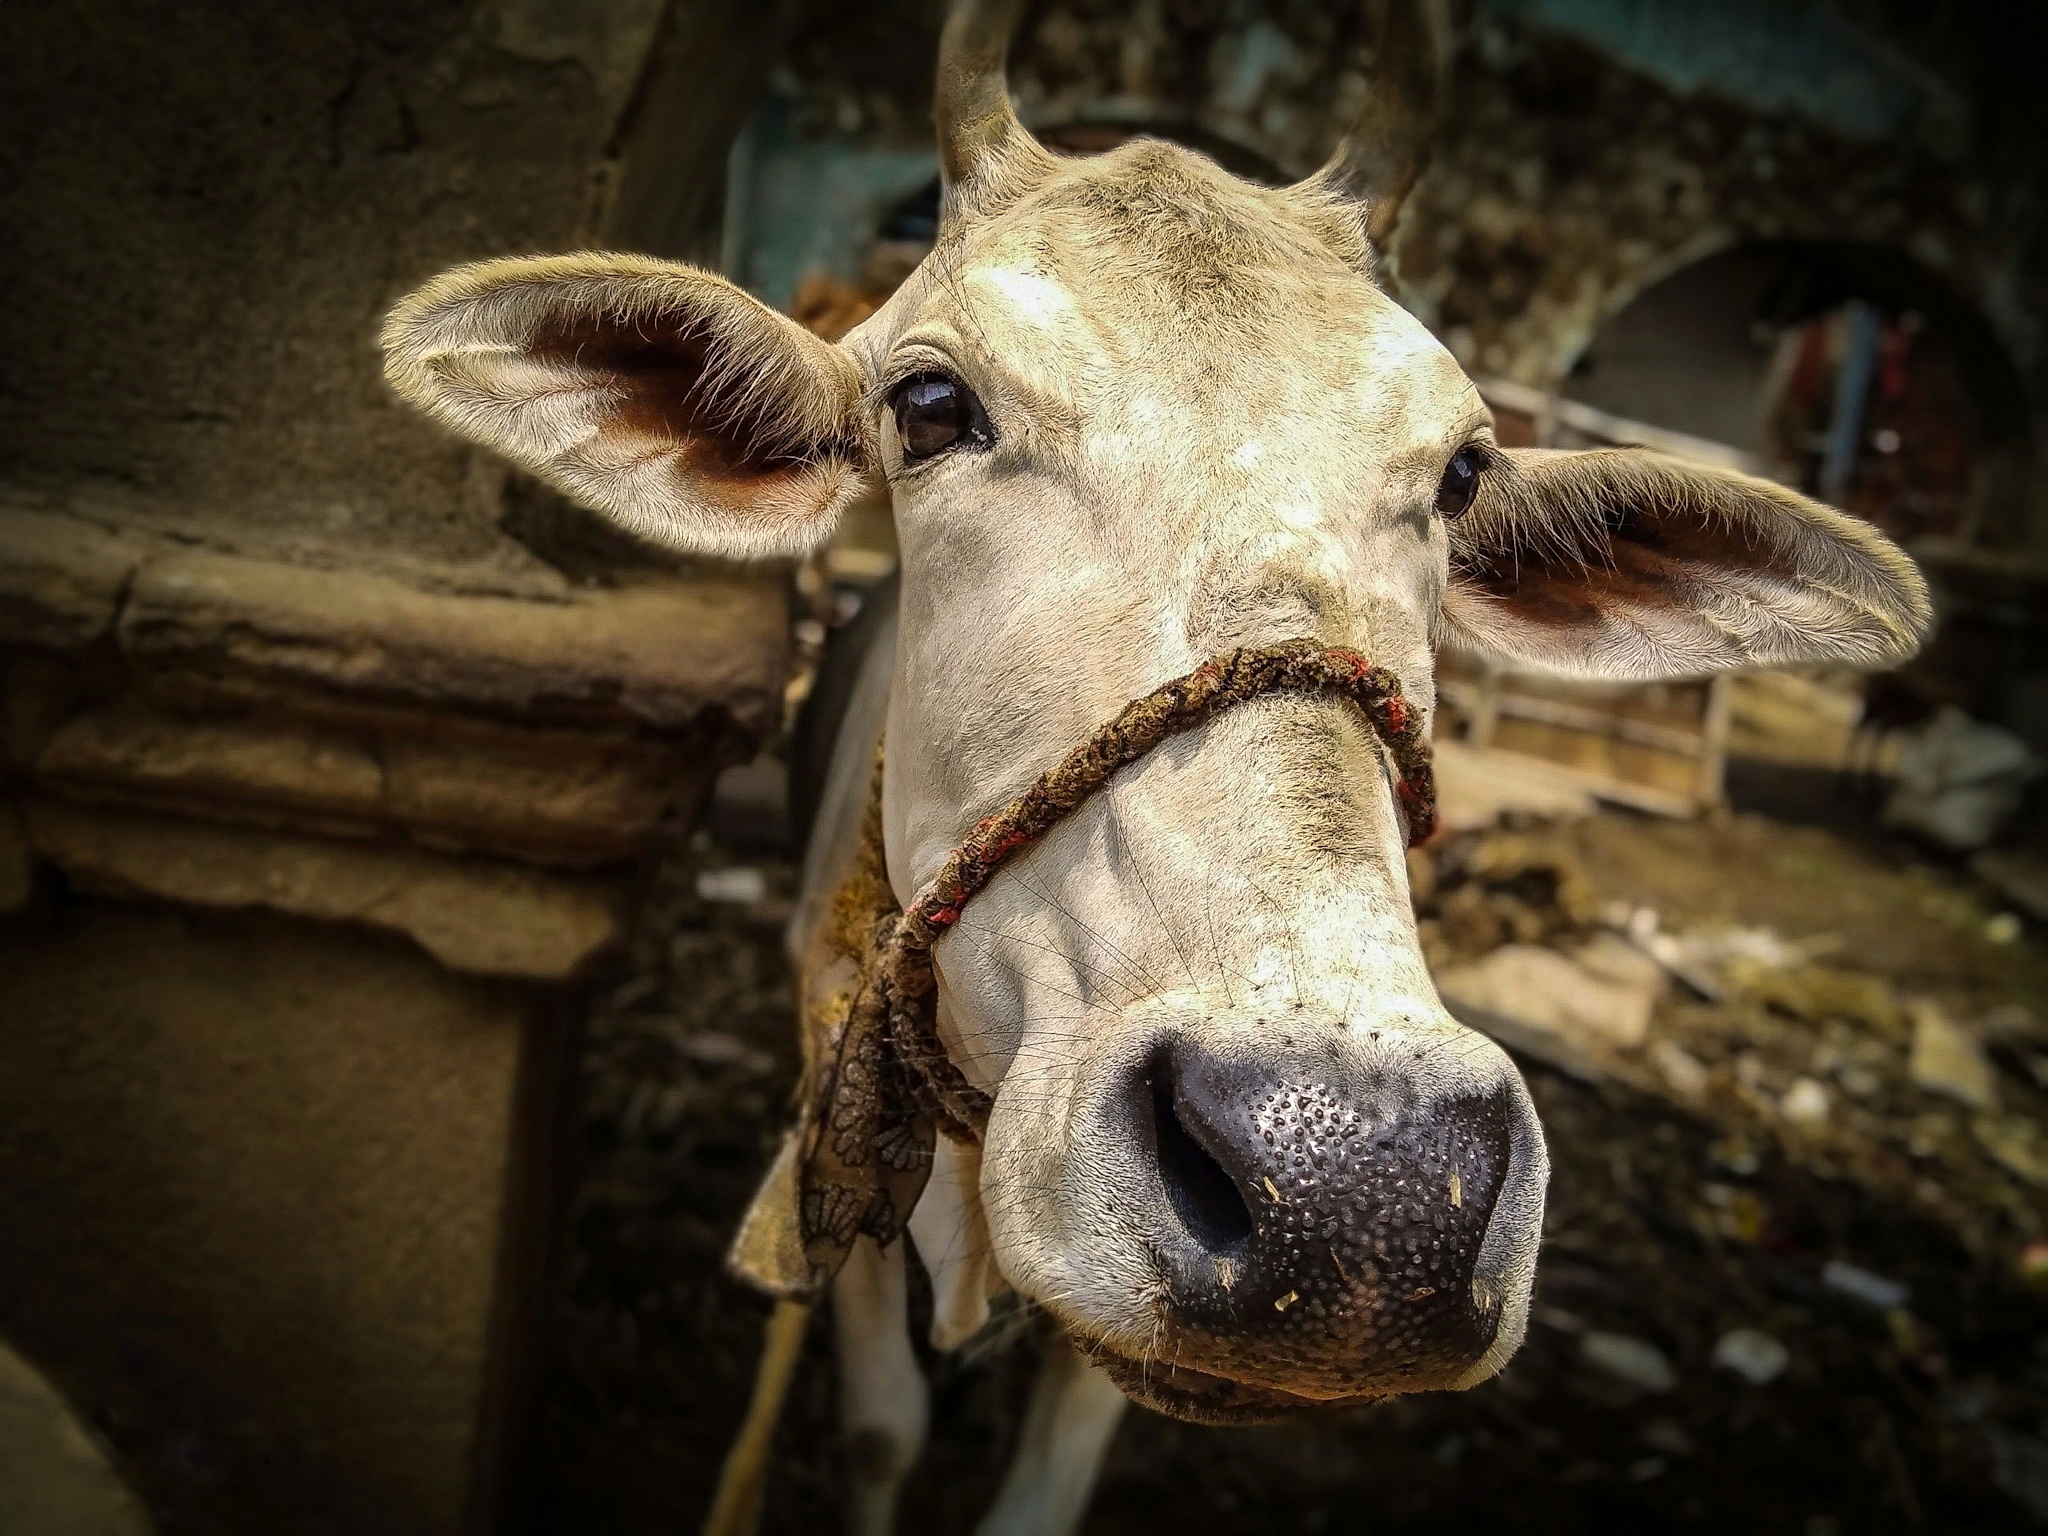 Cow’s face on Focus